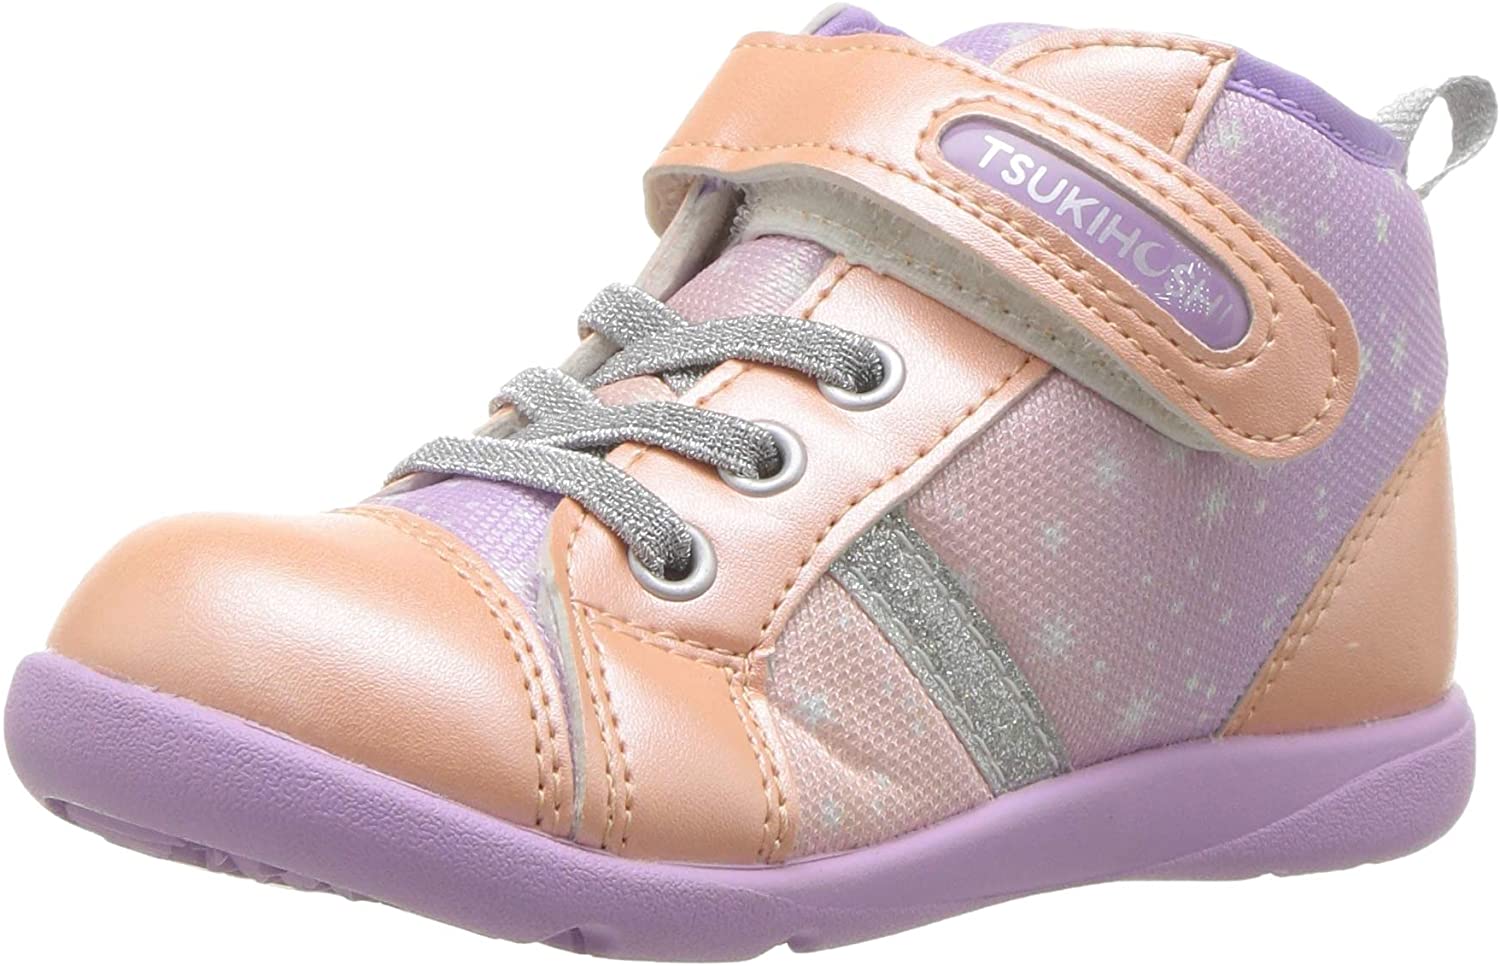 Child Tsukihoshi Star Sneaker  in Peach/Lavender from the front view